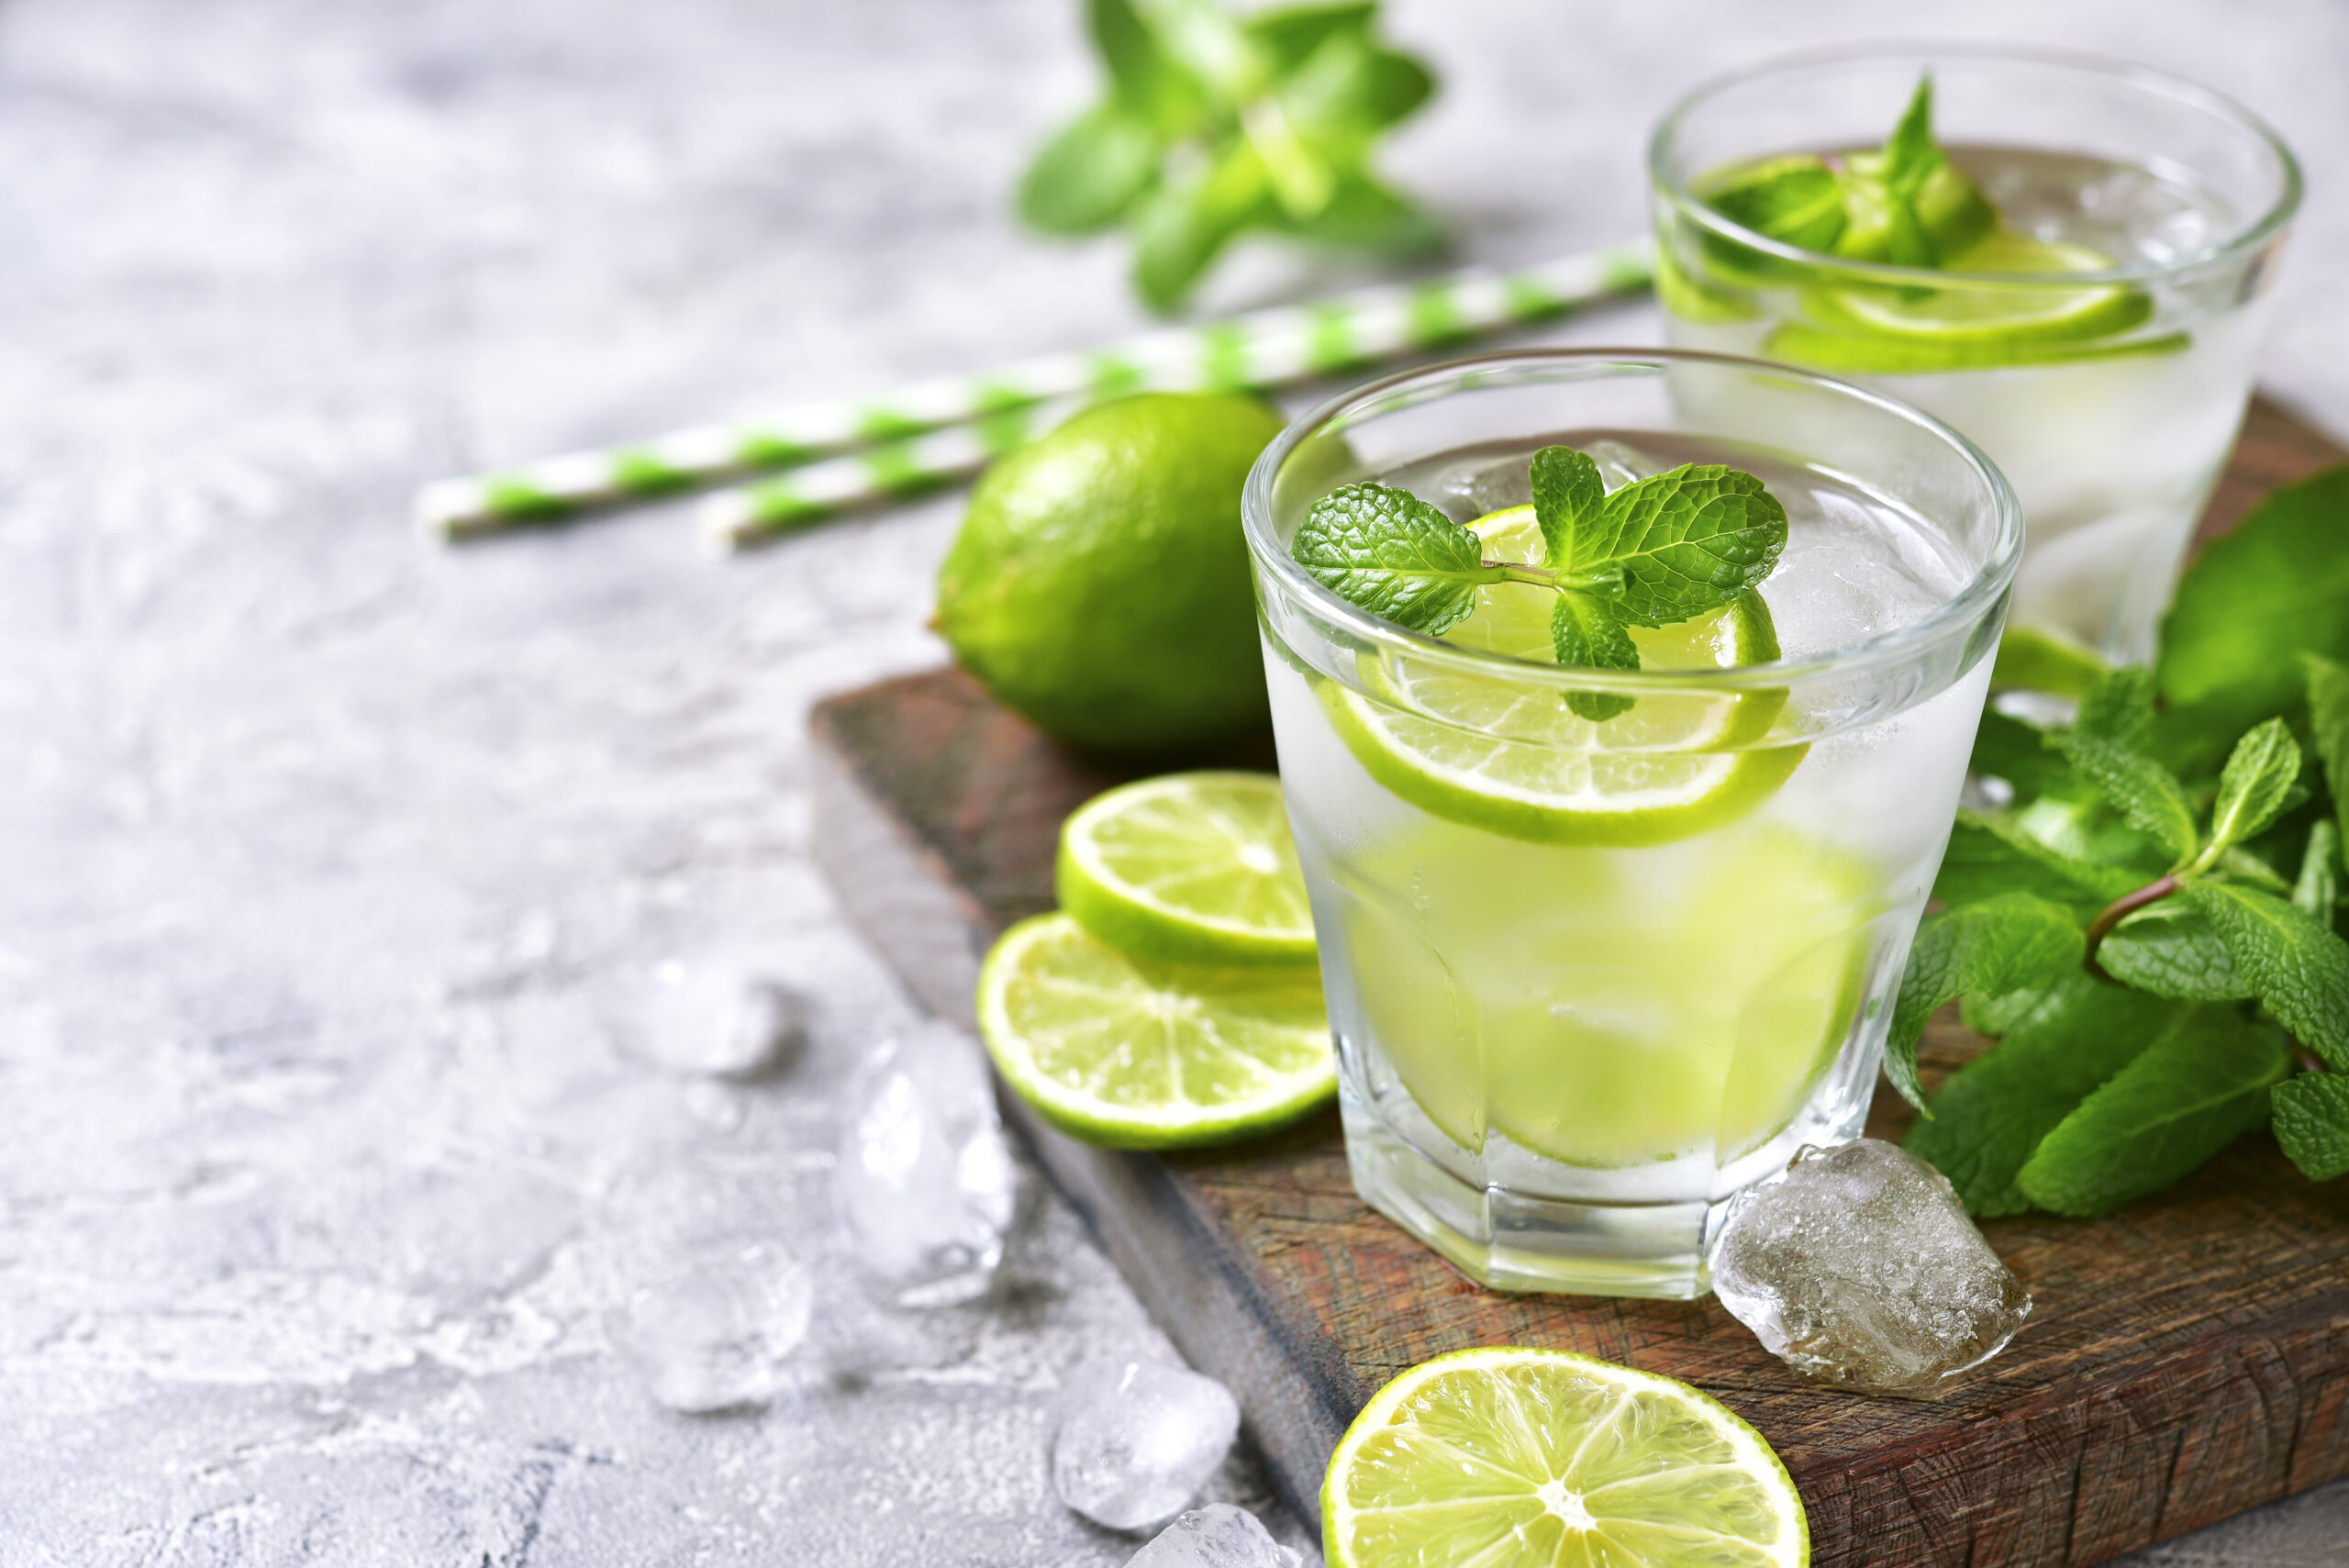 Cold,Refreshing,Summer,Lemonade,Mojito,In,A,Glass,On,A